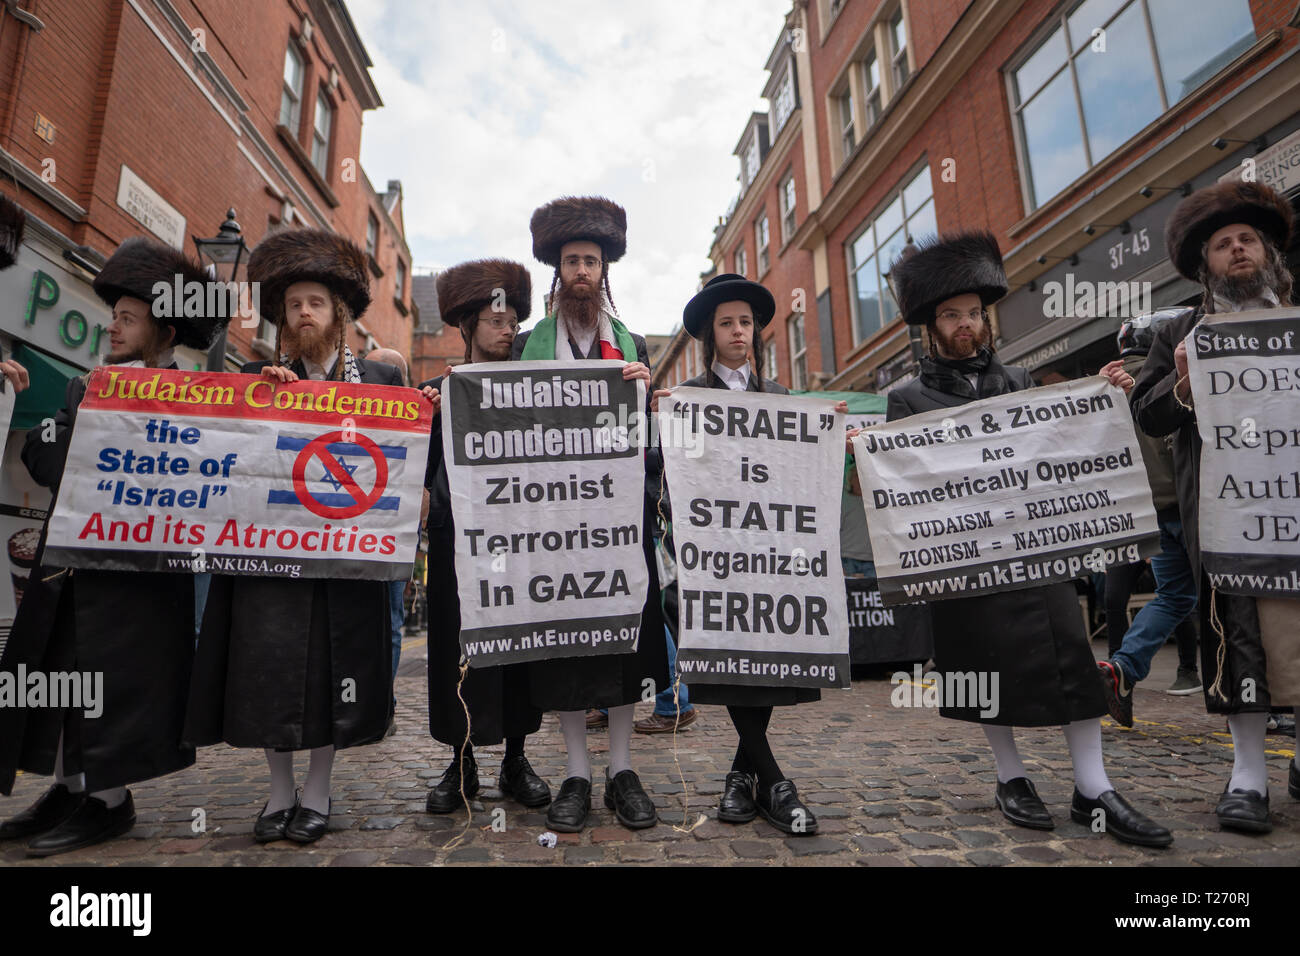 London, UK. 30th March 2019. Orthodox Jewish protesters at a pro-Palestine demonstration (Exist, Resist Return) outside the Israel embassy in London. Photo date: Saturday, March 30, 2019. Photo: Roger Garfield/Alamy Live News Credit: Roger Garfield/Alamy Live News Stock Photo